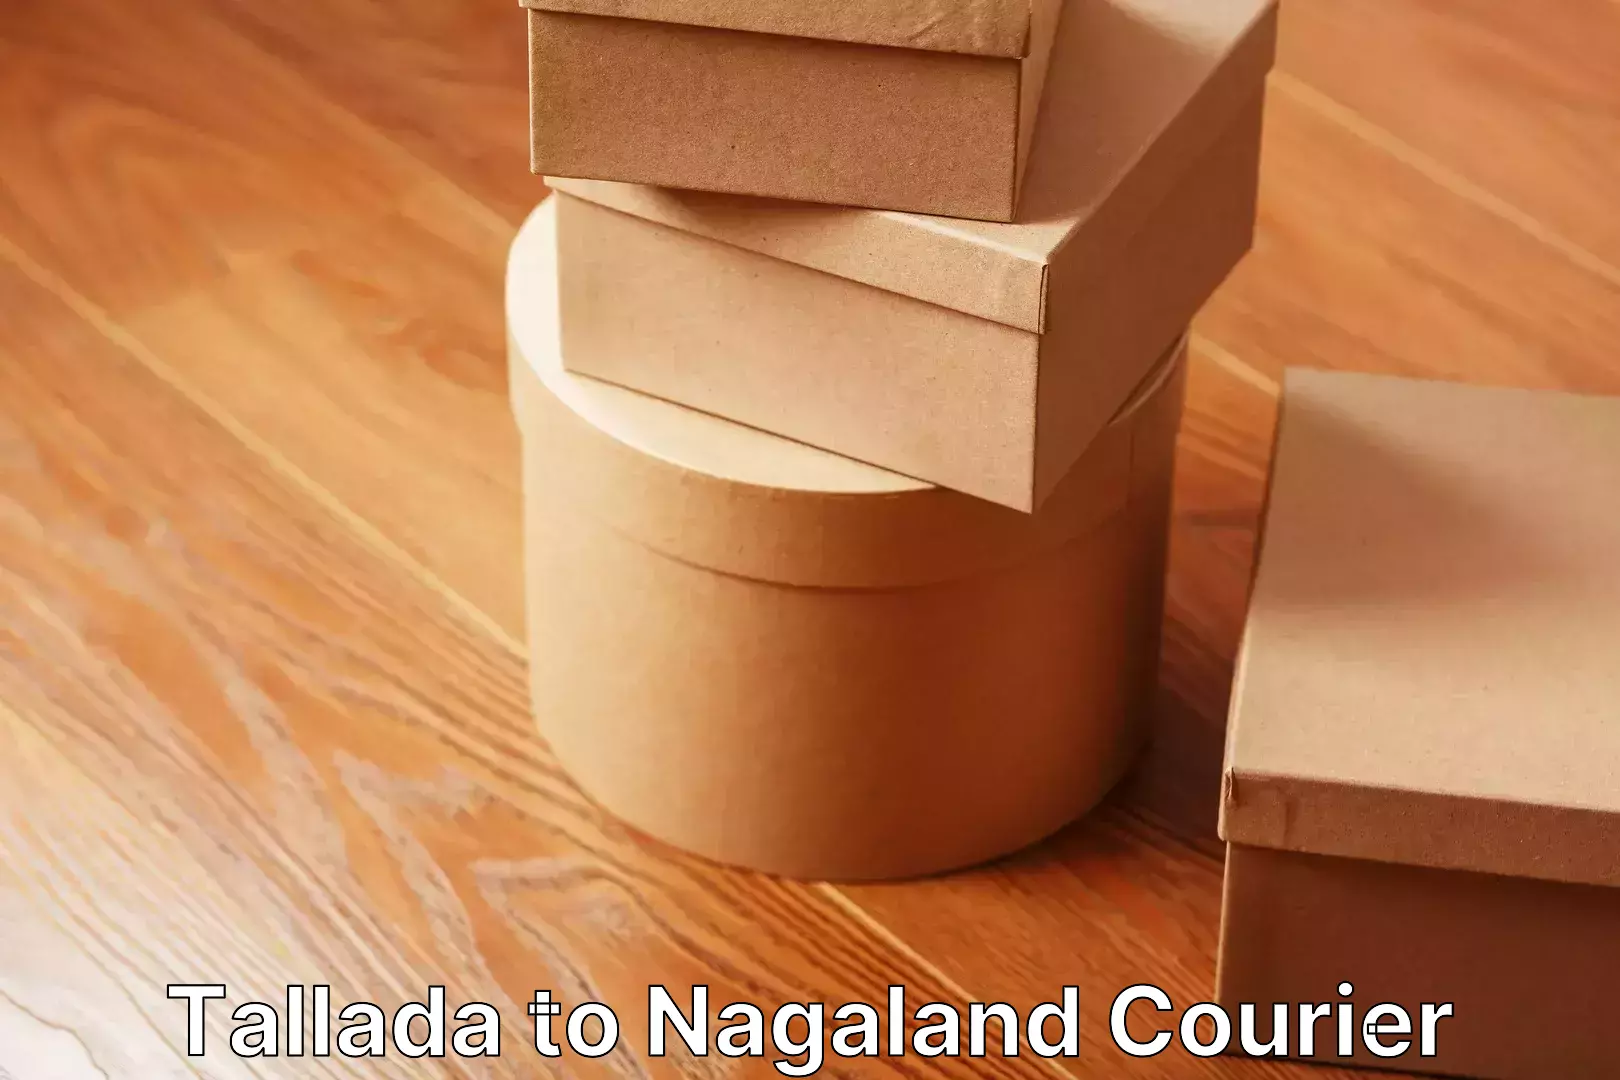 Furniture moving assistance Tallada to Nagaland